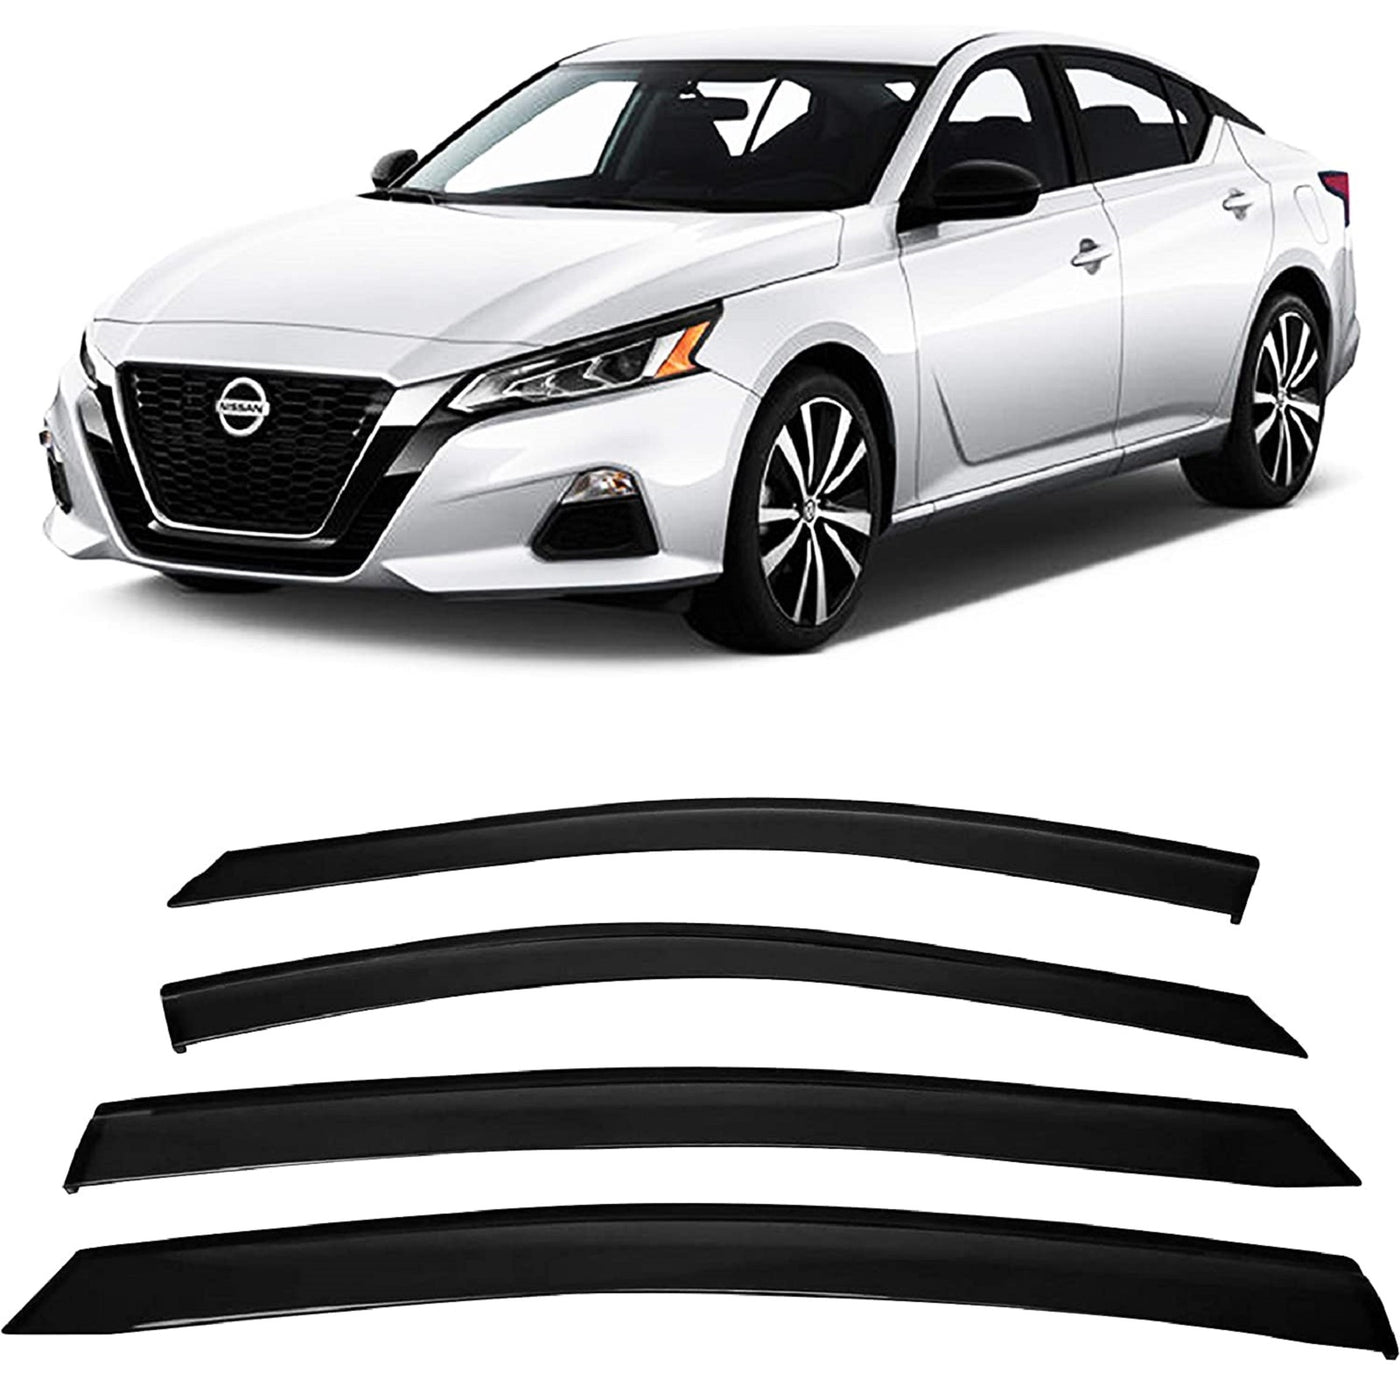 Tape-On Rain Guards for Nissan Altima 2019-2022